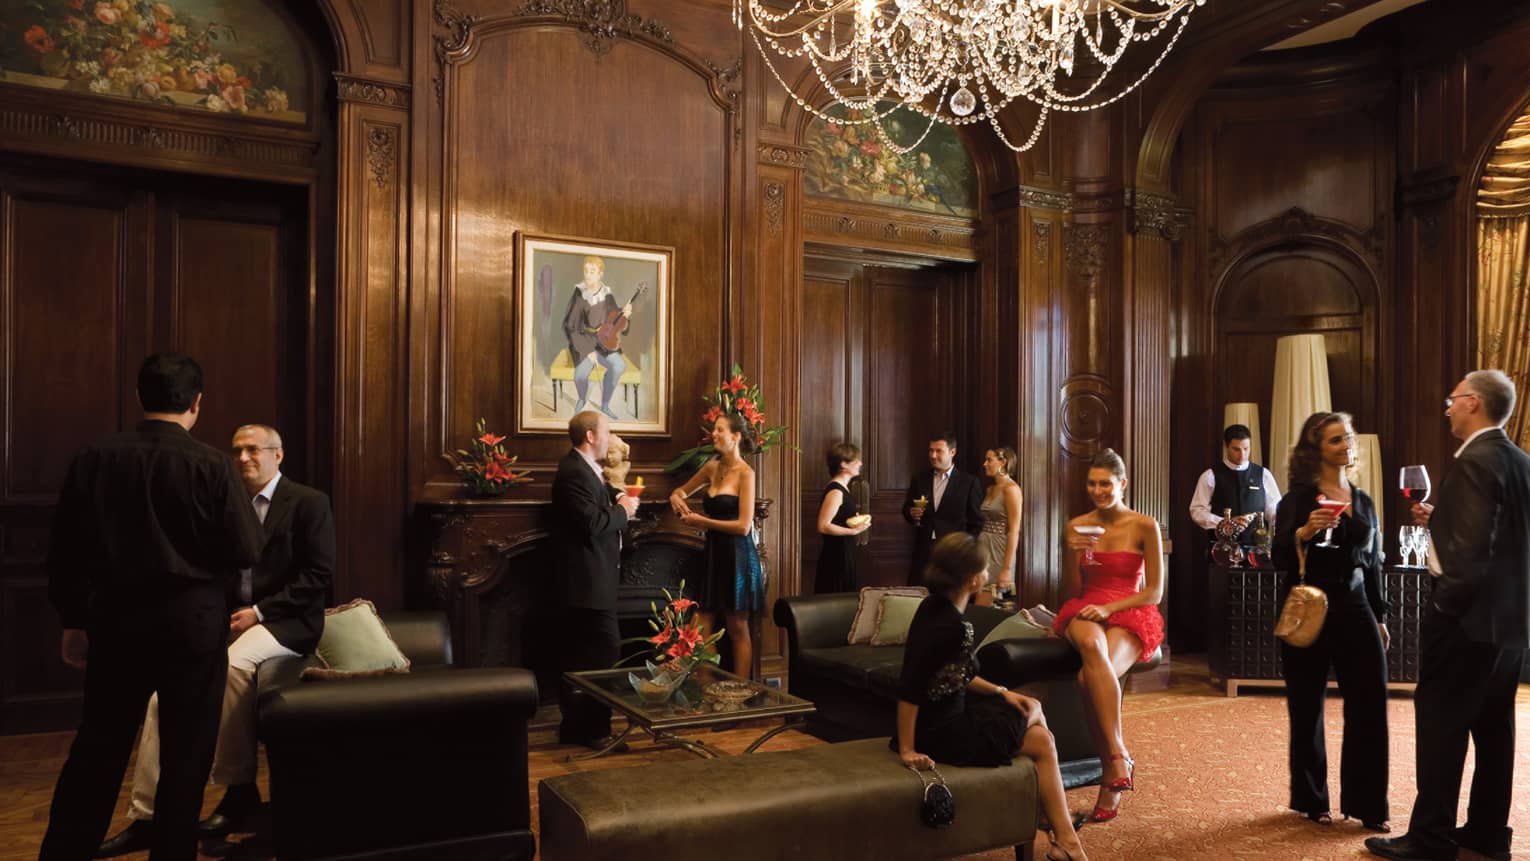 People wearing cocktail attire socialize in elegant ballroom with wood walls, crystal chandelier, leather benches 